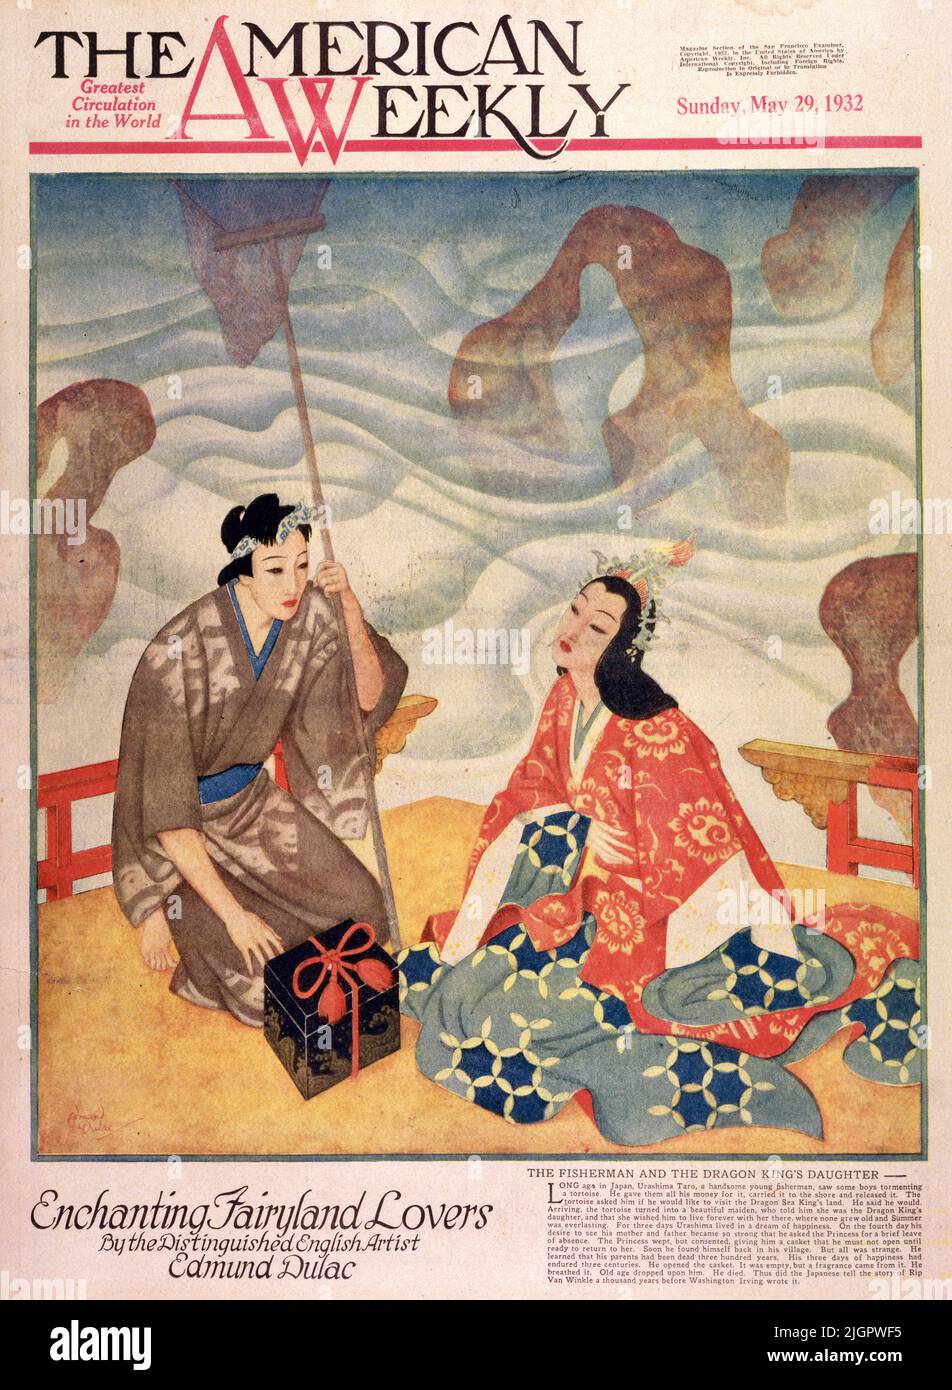 The Fisherman and the Dragon King’s Daughter published on May 29,1932 in the American Weekly magazine painted by Edmund Dulac. Long ago in Japan, Urashima Taro, a handsome young fisherman, saw some boys tormenting a tortoise. He gave them all his money for it, carried it to the shore and released it. The tortoise asked him if he would like to visit the Dragon Sea King’s land. He said he would. Arriving, the tortoise turned into a beautiful maiden, who told him she was the Dragon King’s daughter, and she wished him to live forever with her there, where none grow old and summer was everlasting. Stock Photo